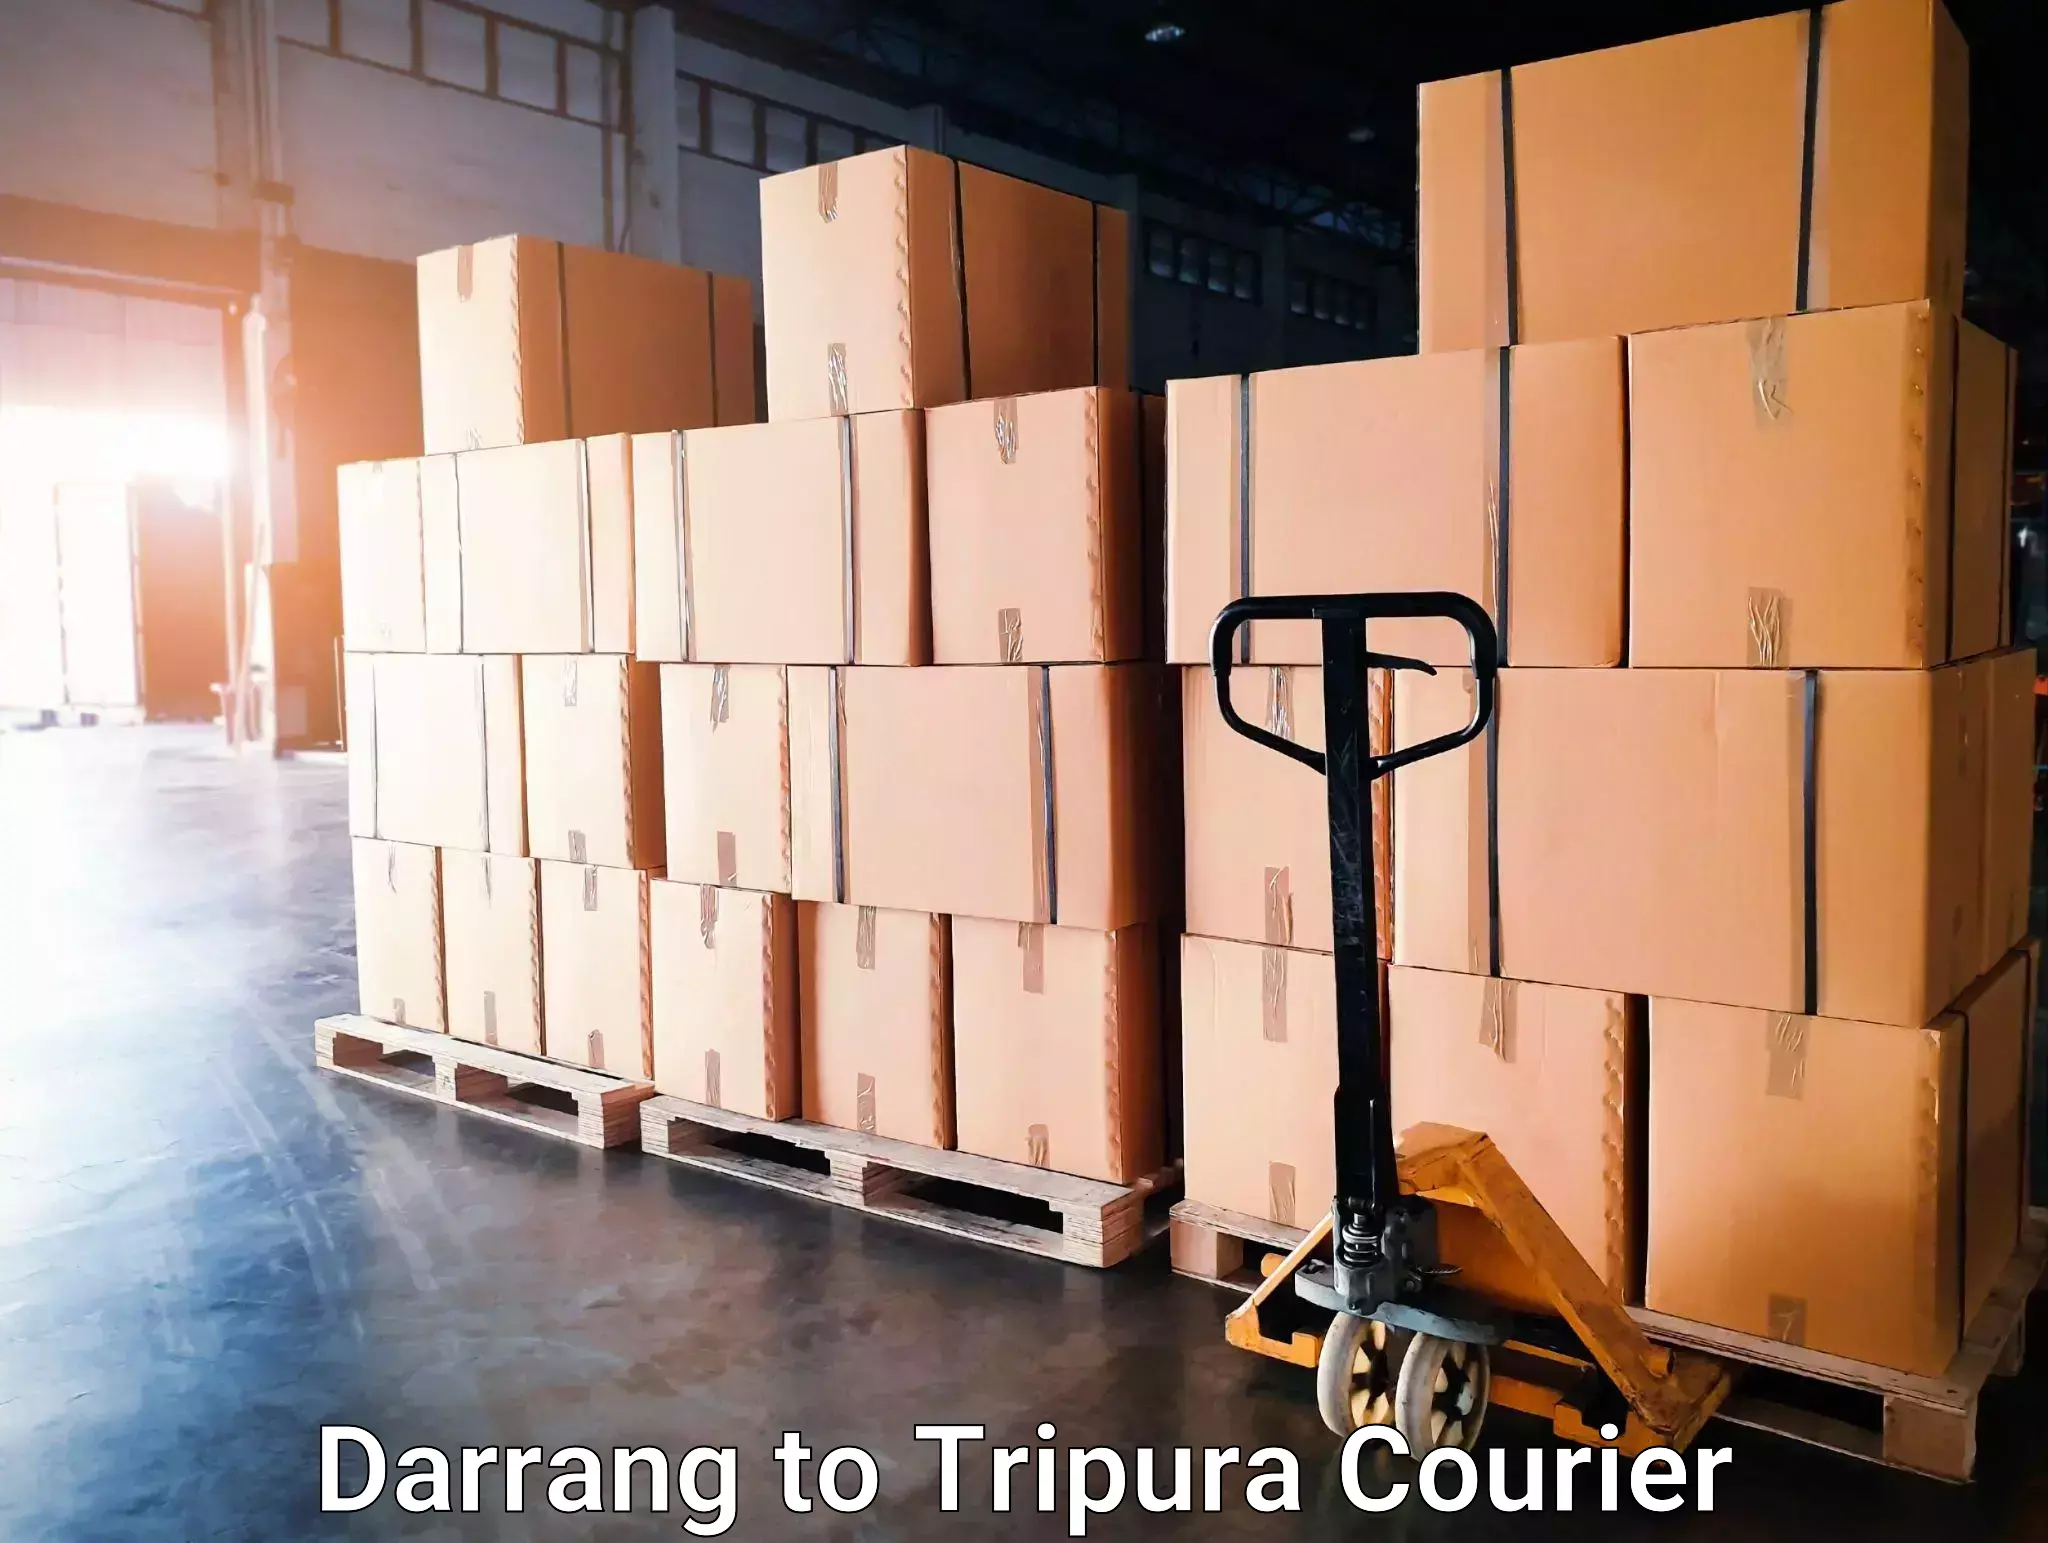 Cash on delivery service Darrang to Tripura